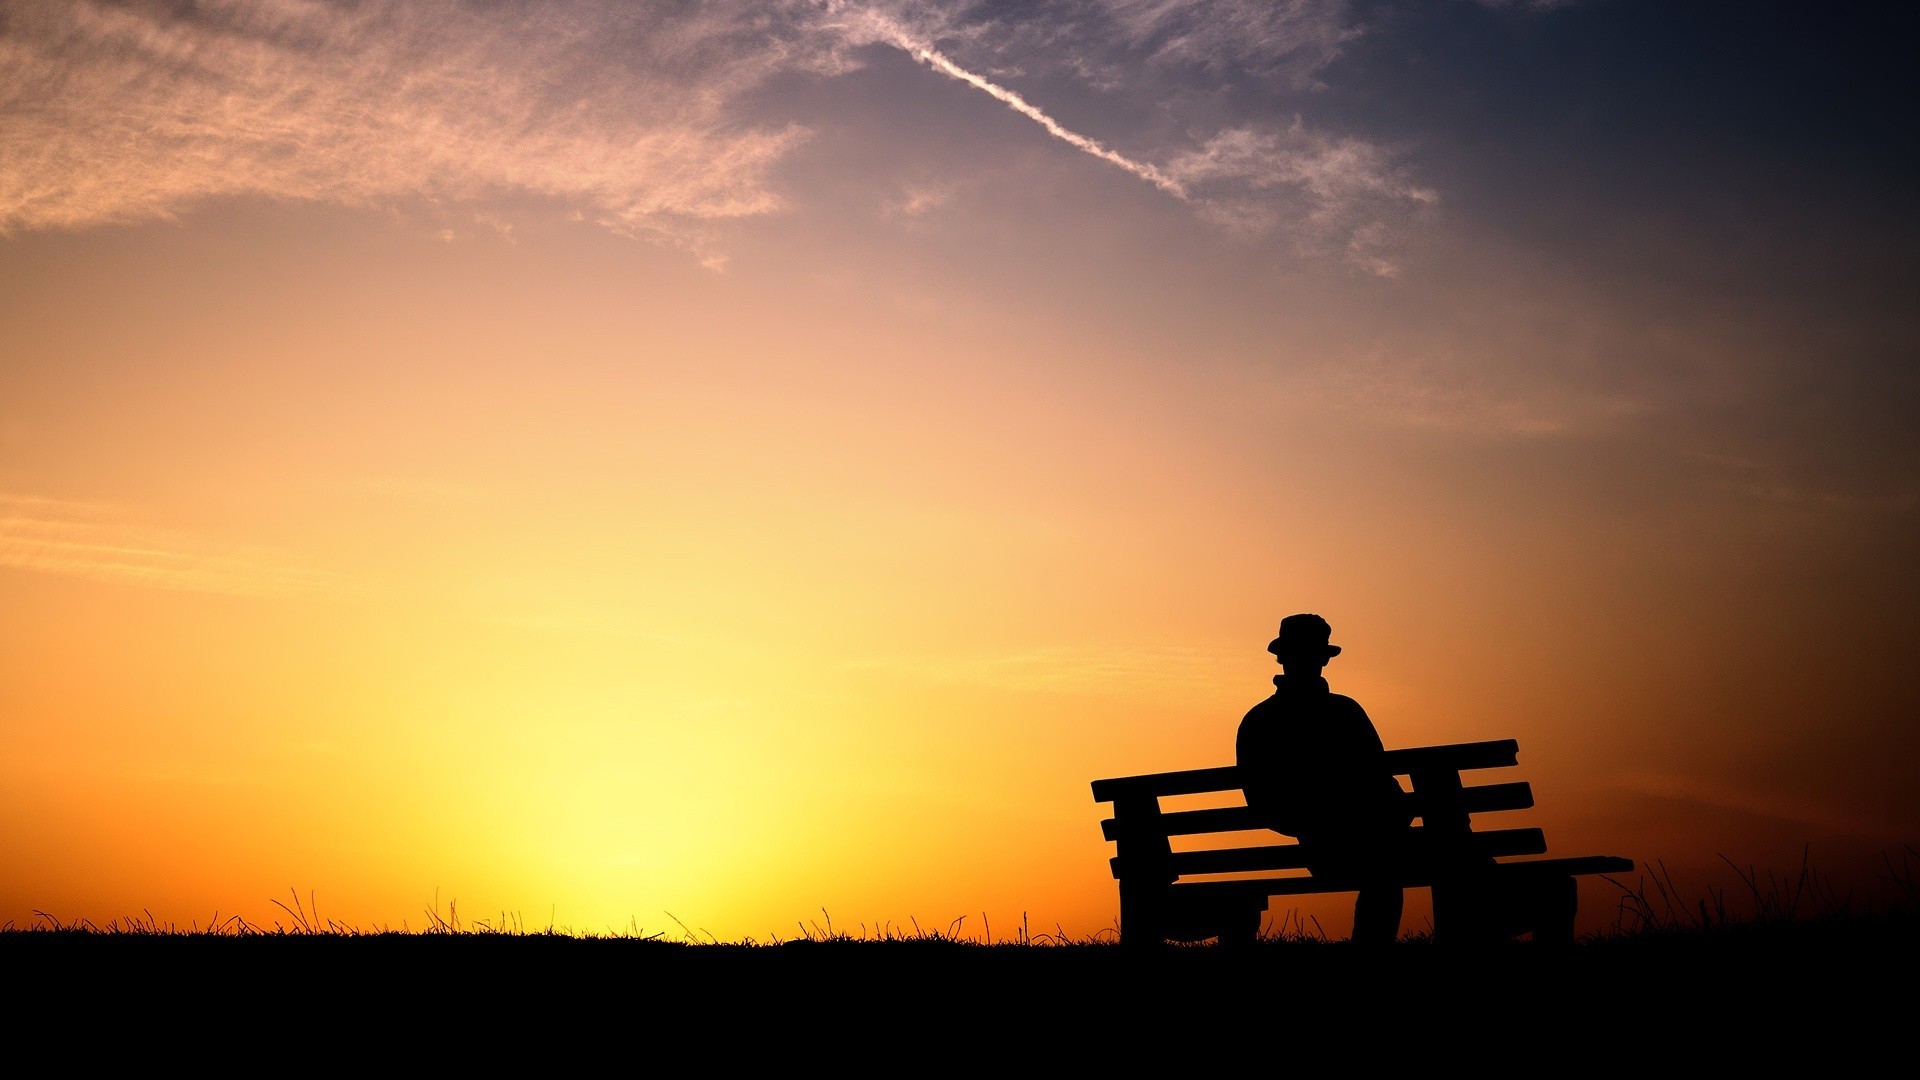 Sunset Loneliness Alone Sitting Clouds Solice Bench Orange 1920x1080